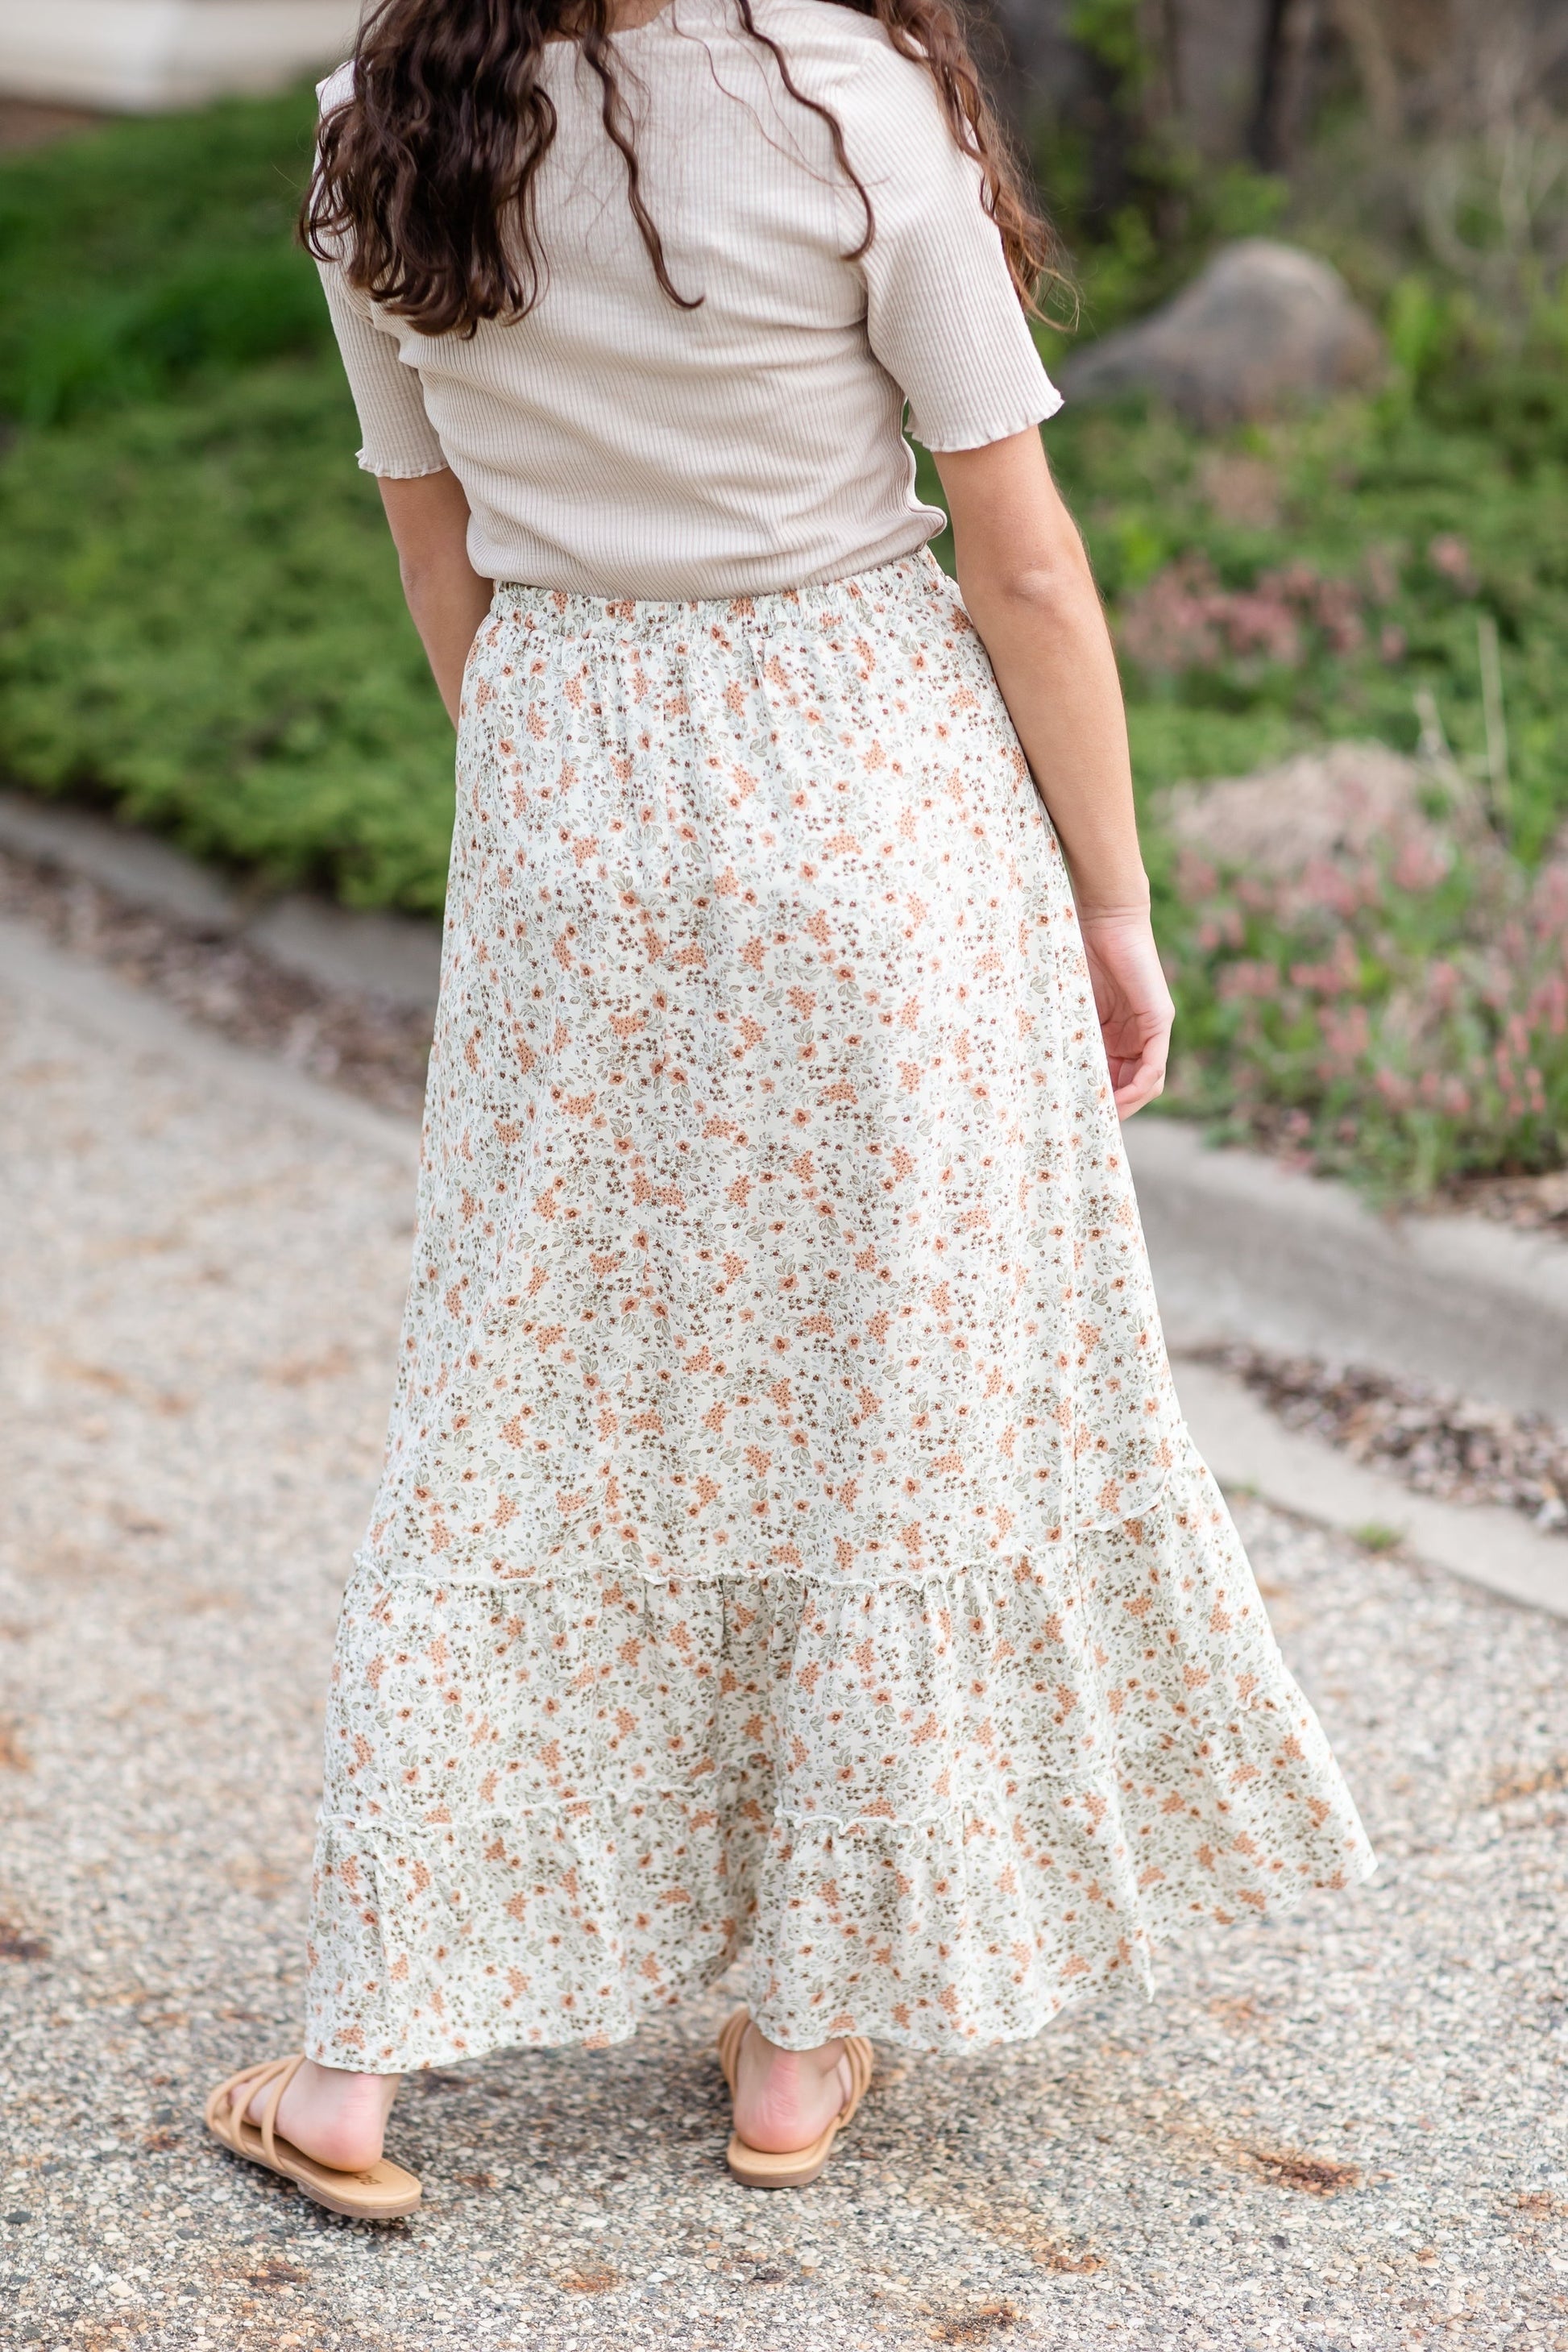 Floral Print Maxi Skirt With Ruffle Detail Skirts